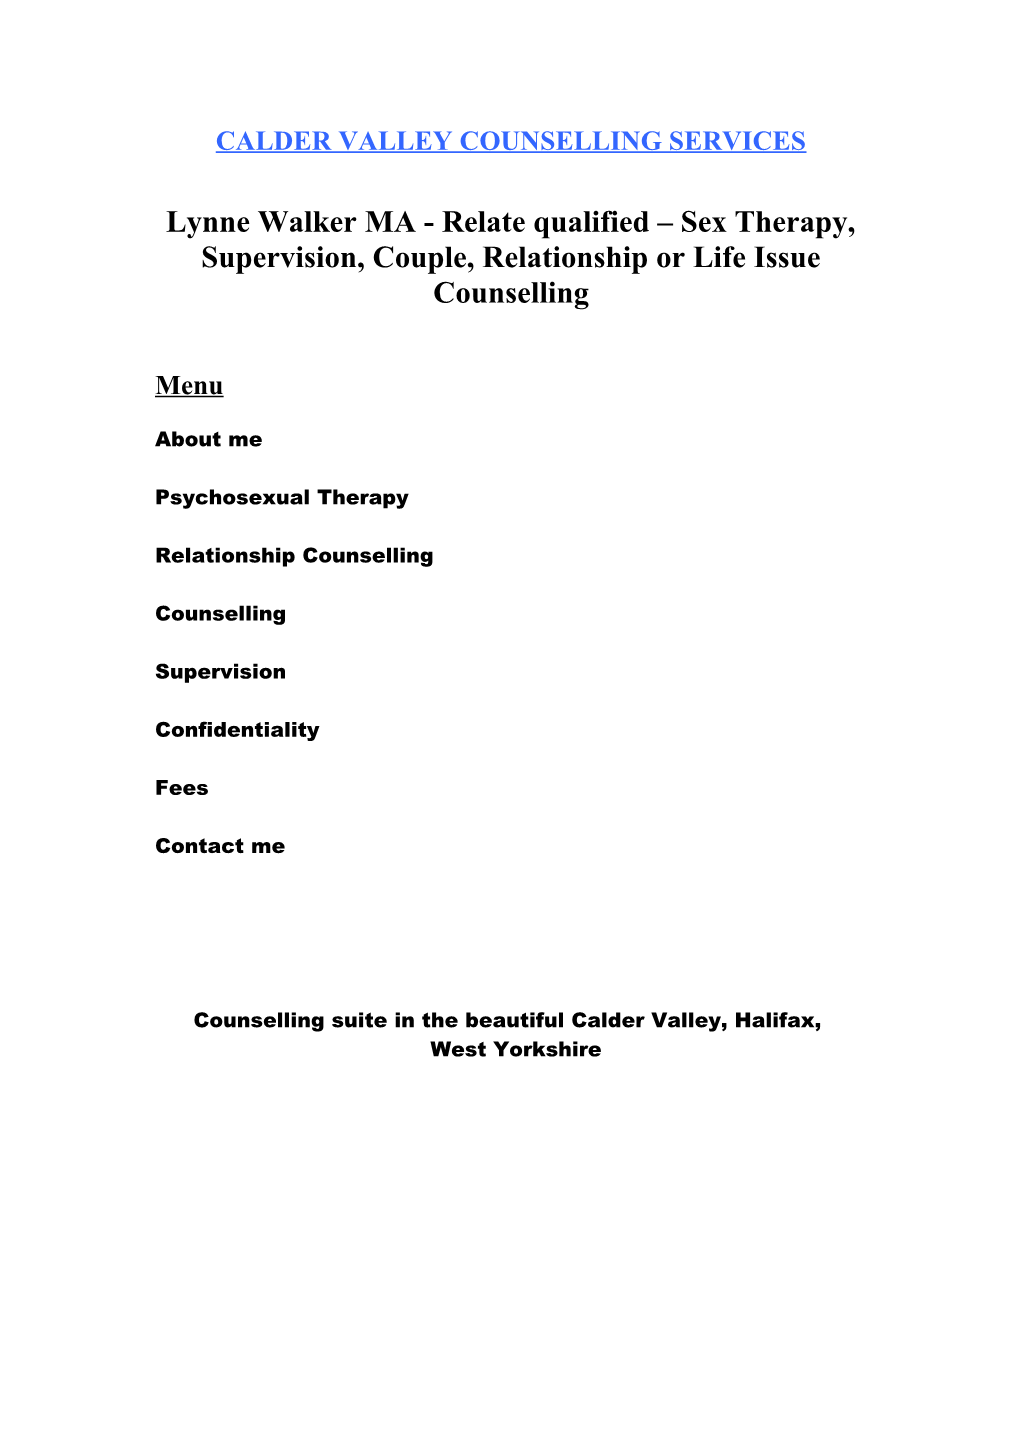 Calder Valley Counselling Services